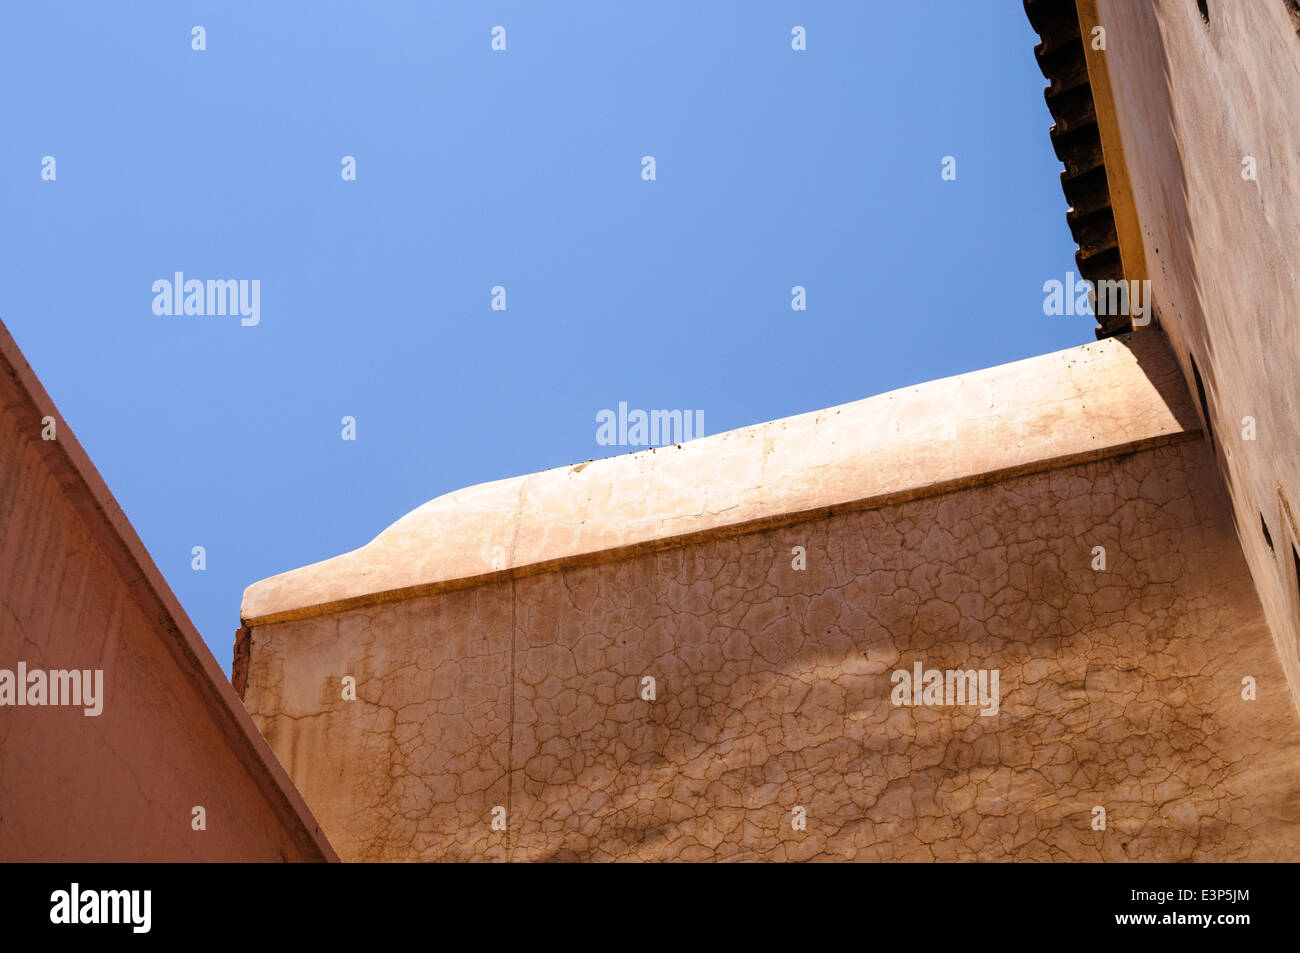 Roof of a typical traditional pink building in Marrakech, Morocco Stock Photo